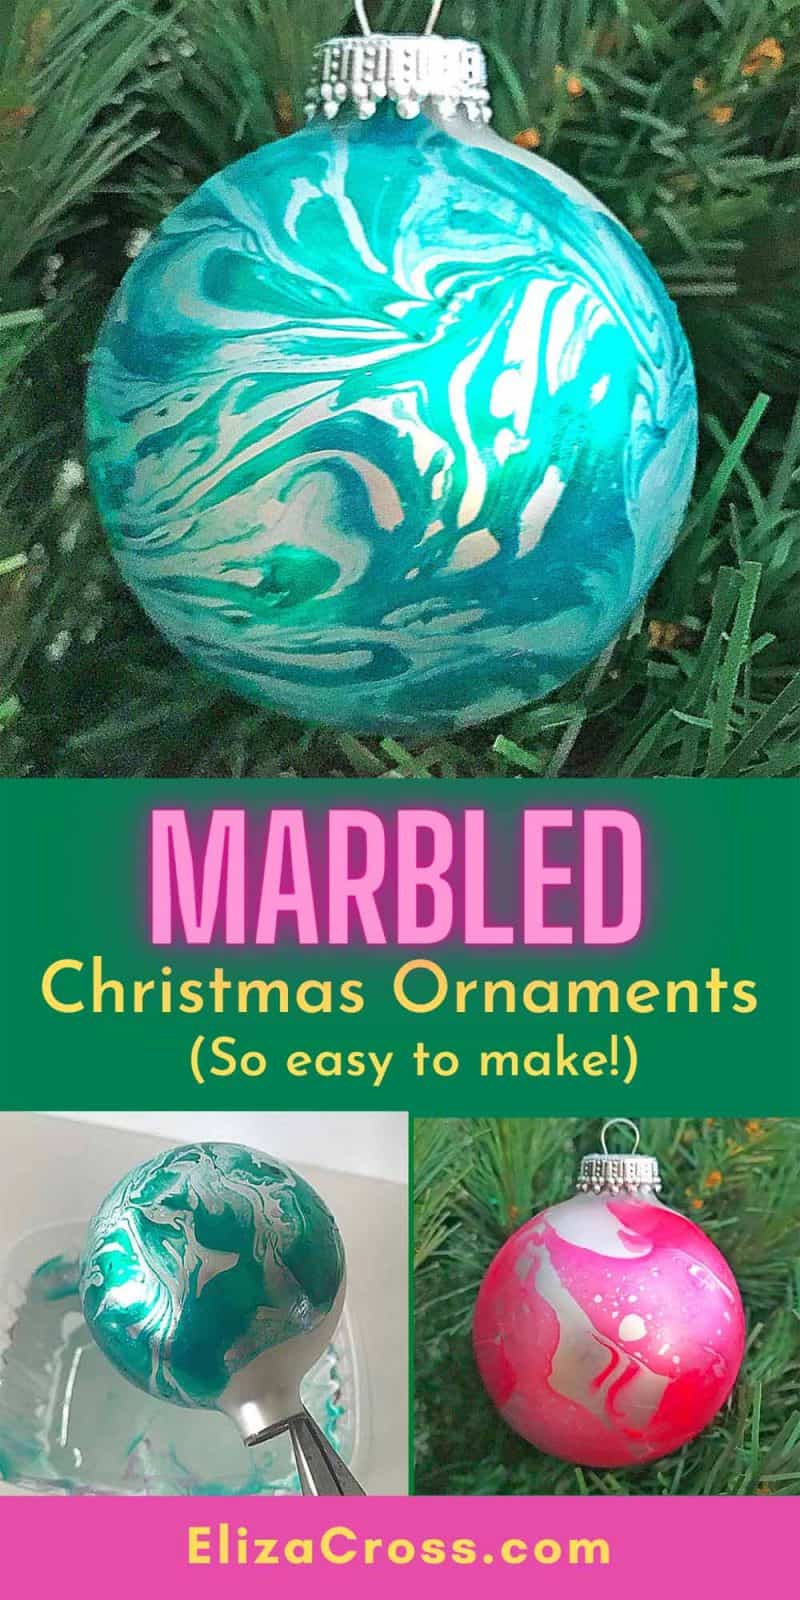 A Pinterest pin showing a large green marbled ornament, dipping an ornament in the marbling solution, and a pink marbled ornament.